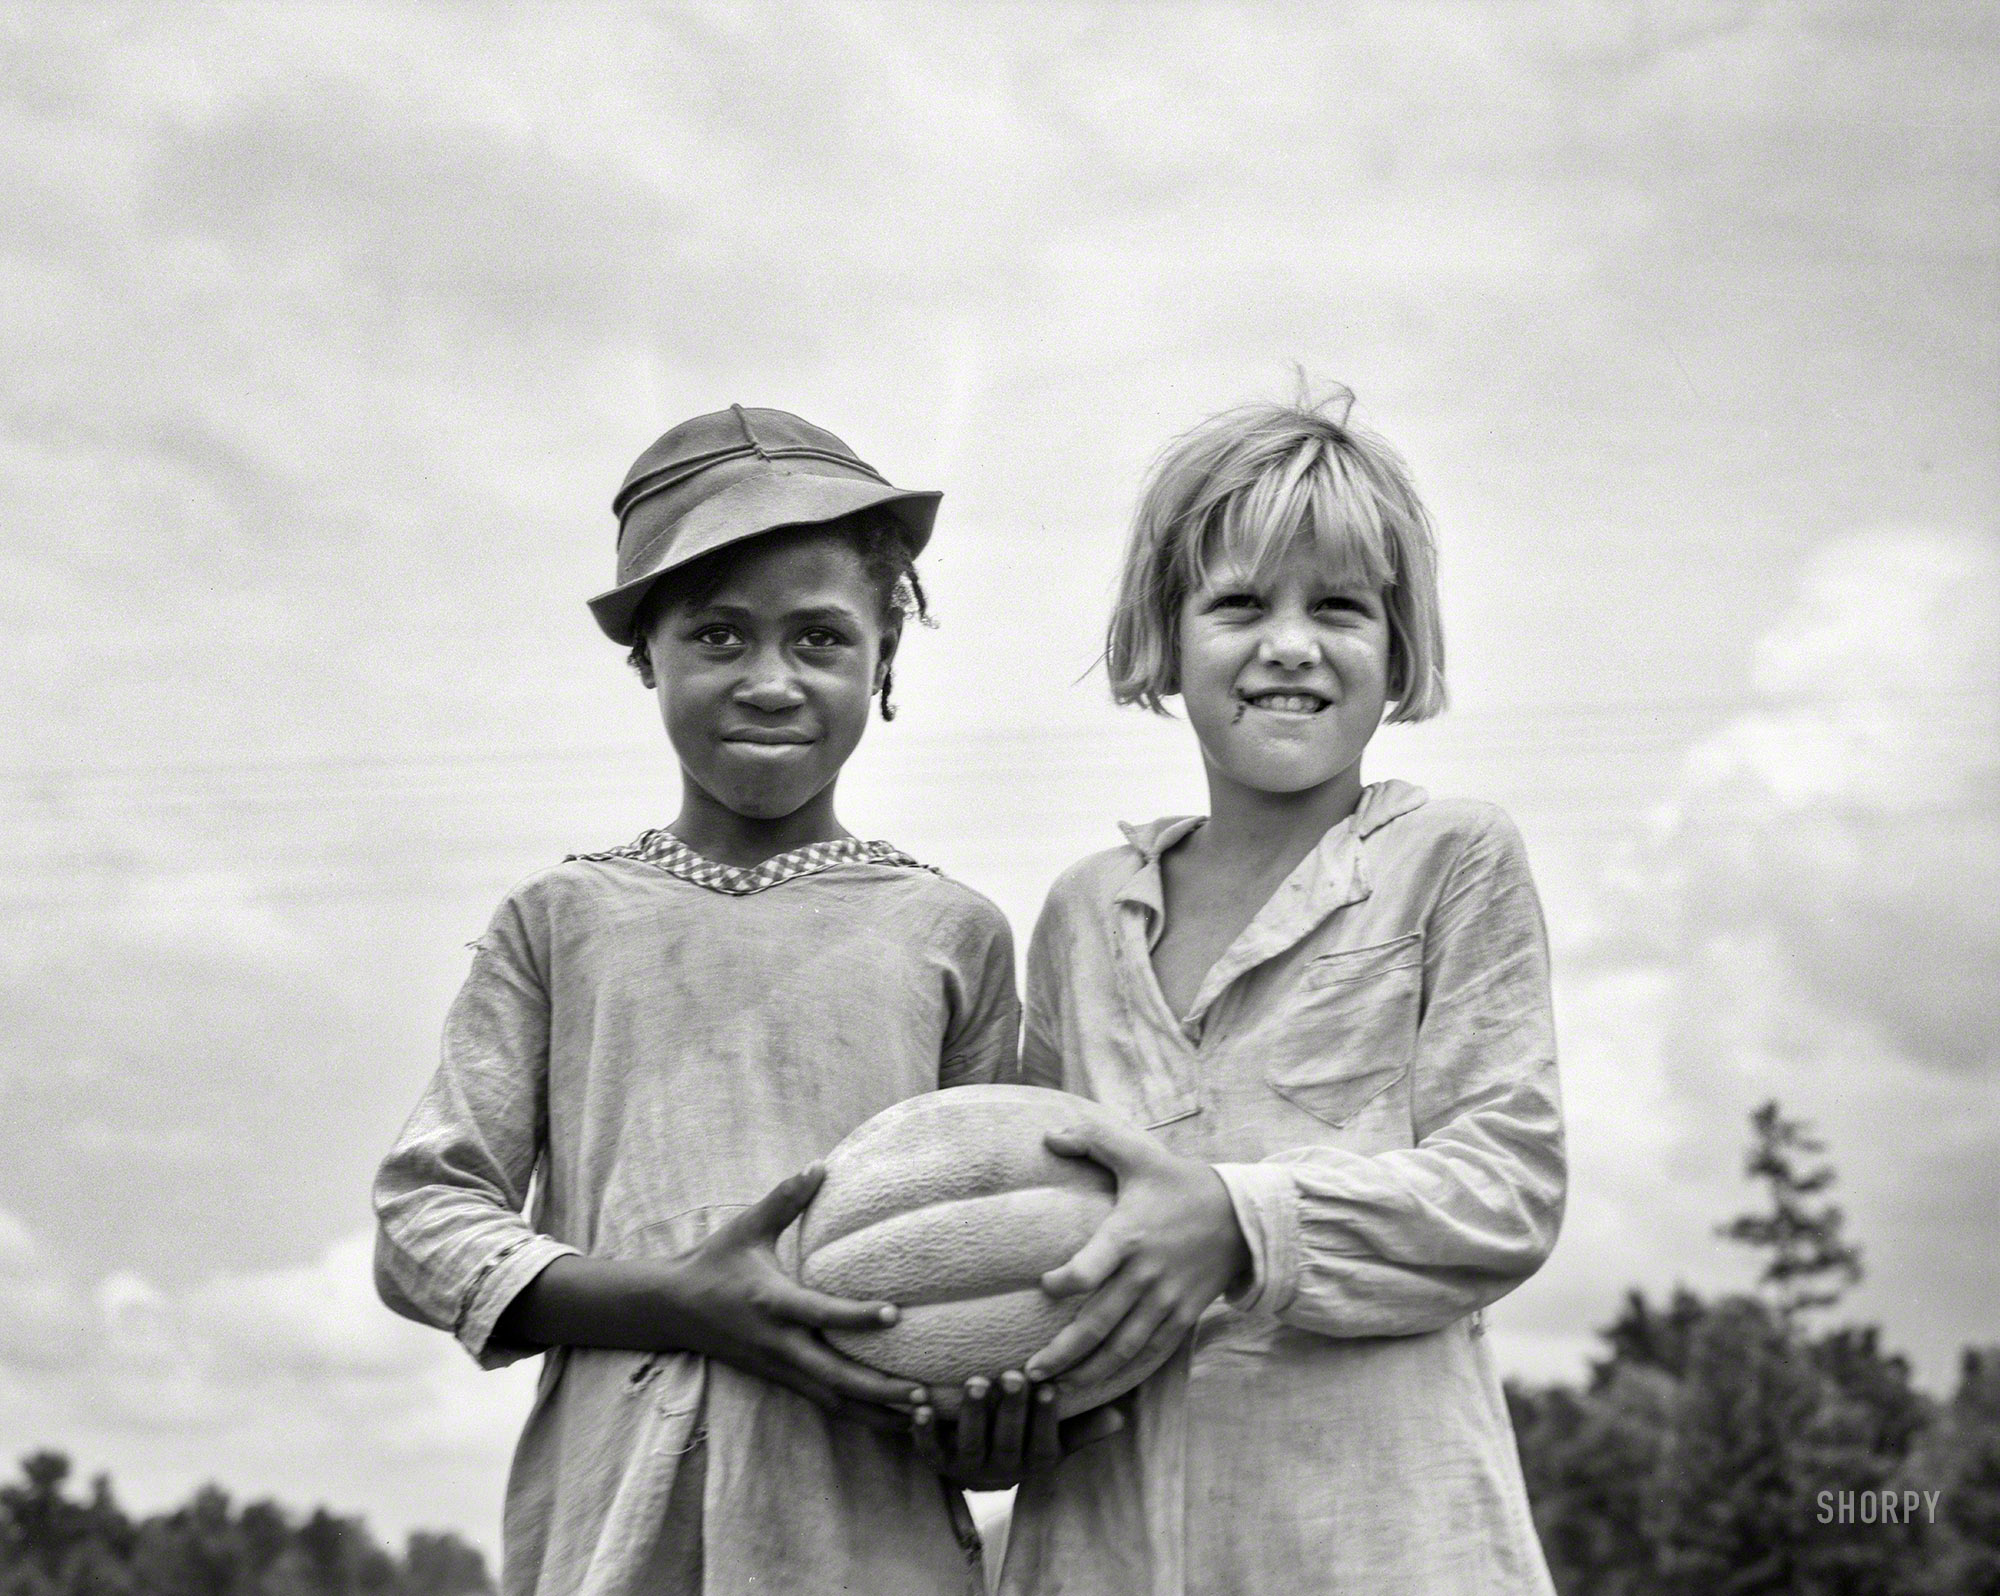 July 1936. "Hillhouse, Mississippi. Girls with food for Fourth of July celebration at Delta Cooperative Farm settled by evicted sharecroppers from Arkansas, organized in 1935 by Sherwood Eddy, a New York writer and reformer." Photo by Dorothea Lange for the Farm Security Administration. View full size.